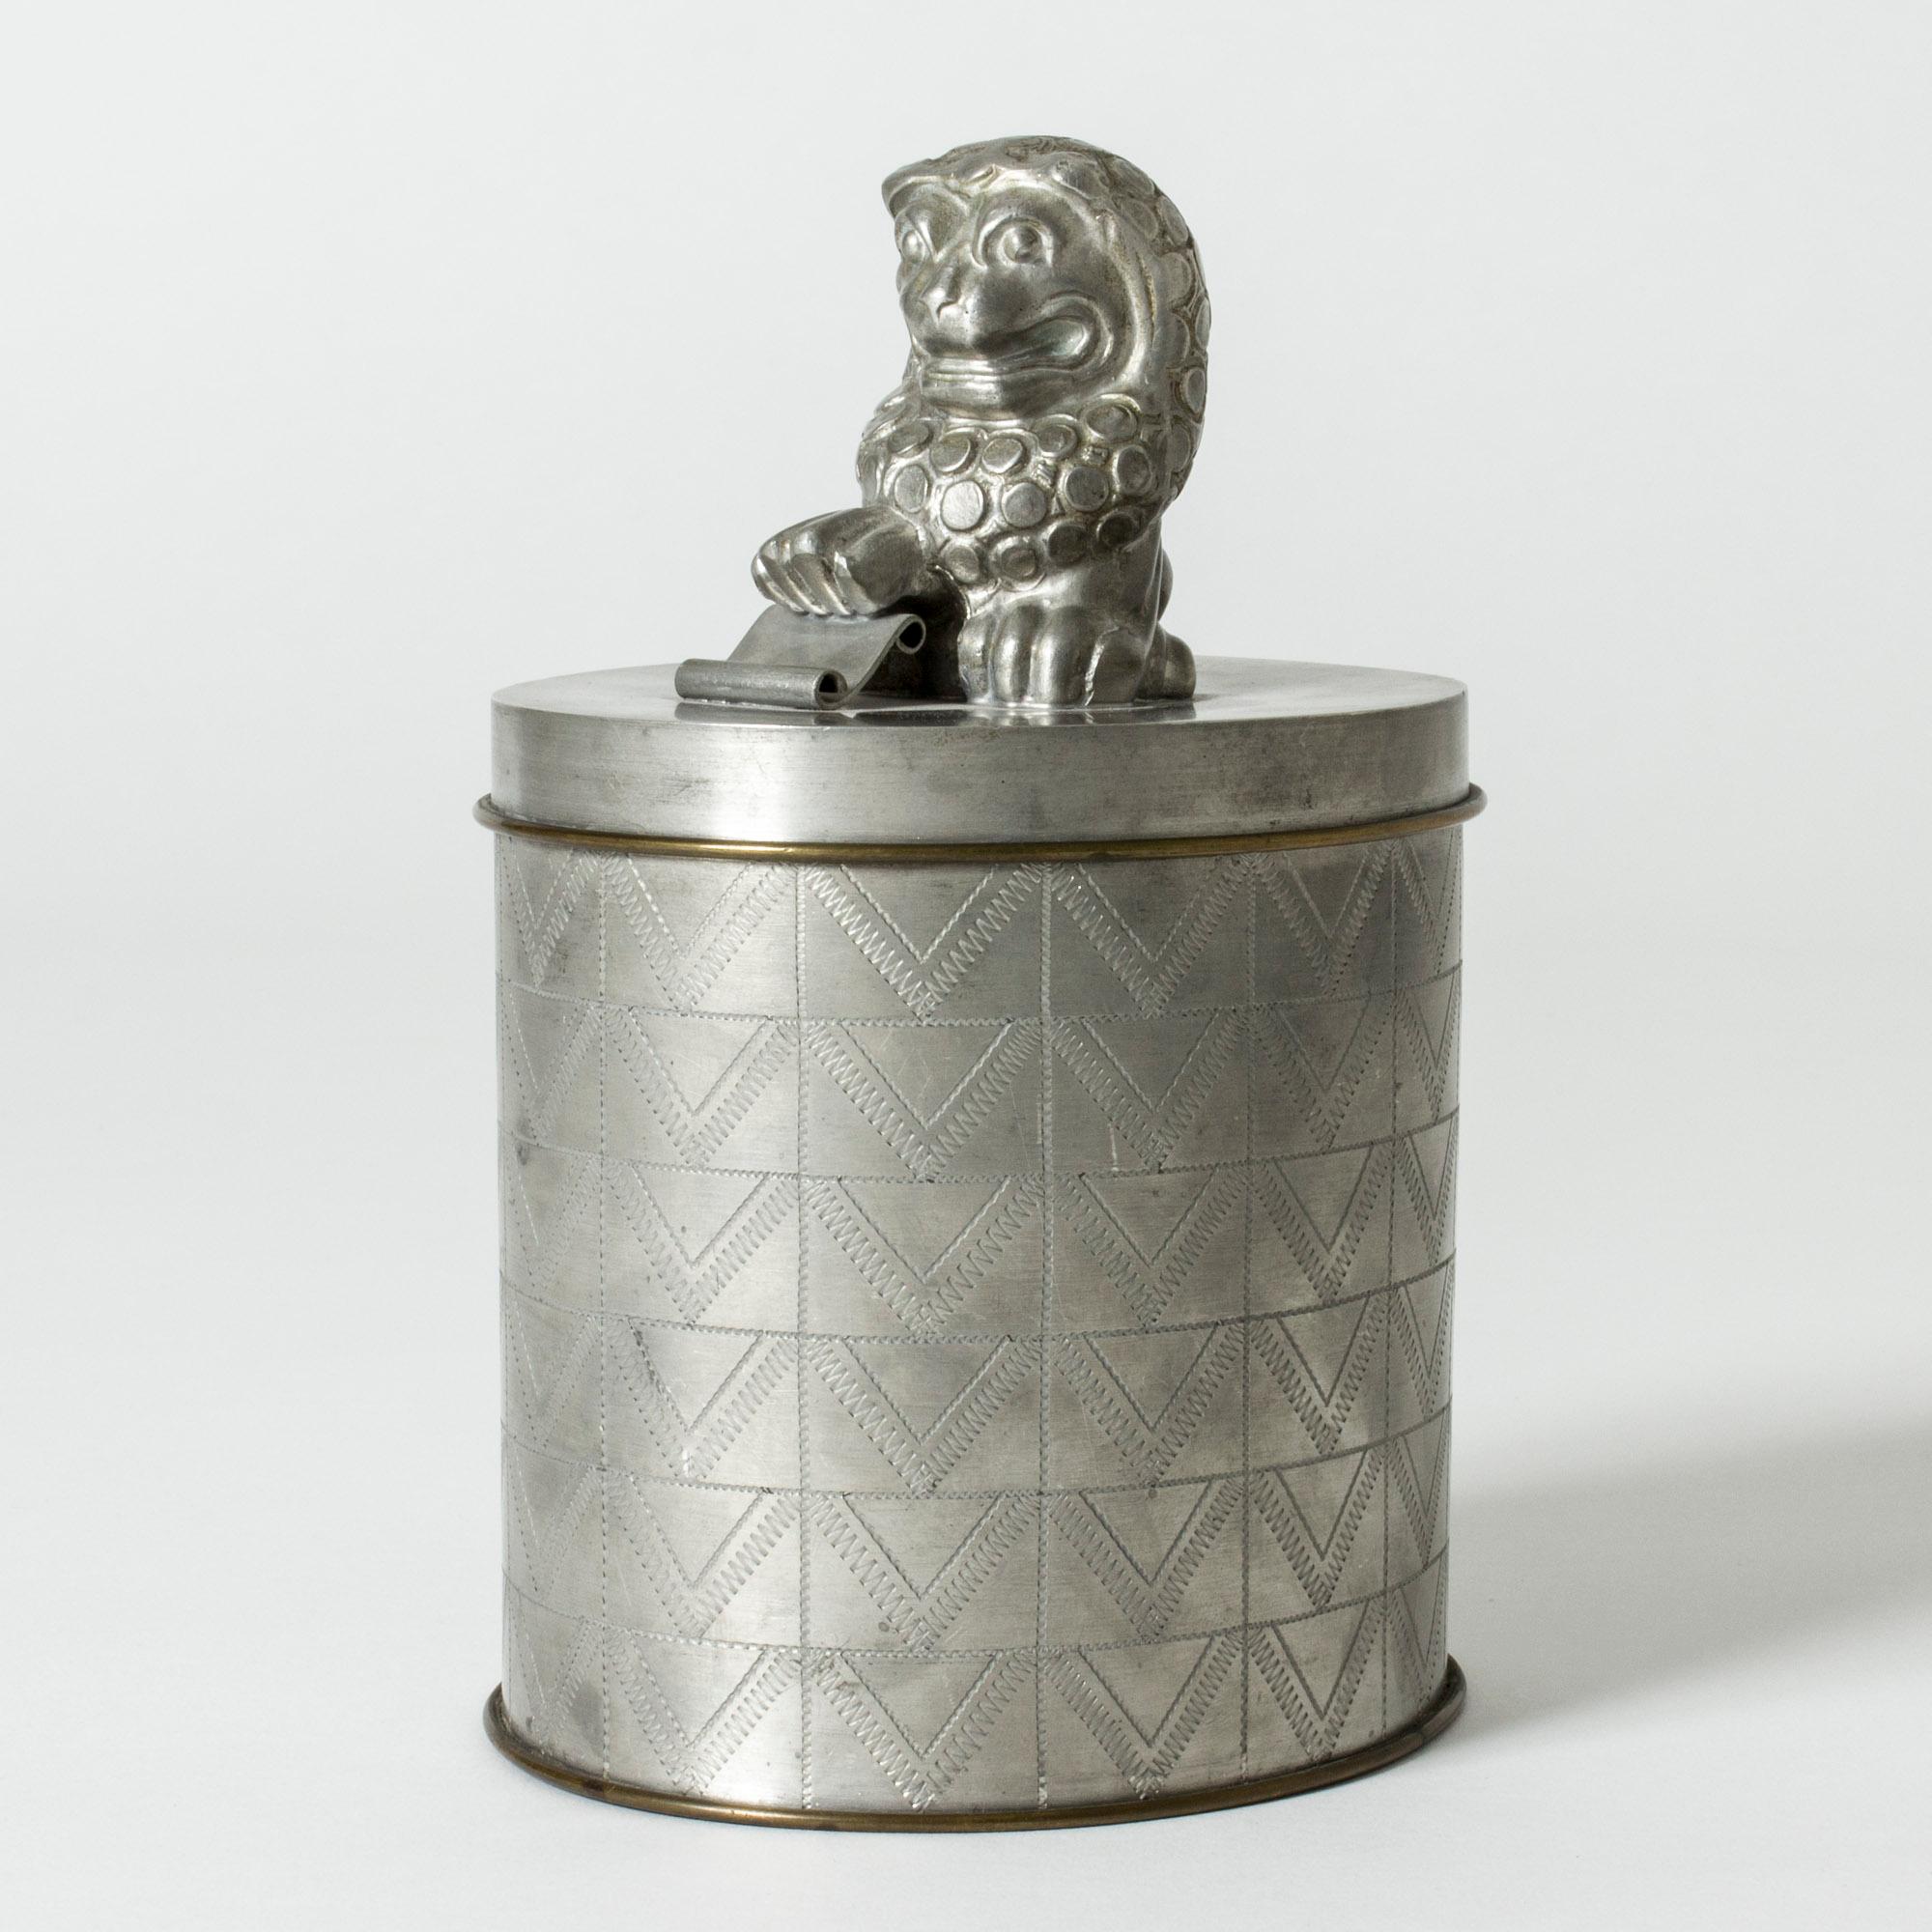 Amazing pewter jar by Anna Petrus, with a line of brass encircling the base and lid. Expressive lion on the lid, body decorated with a graphic pattern.